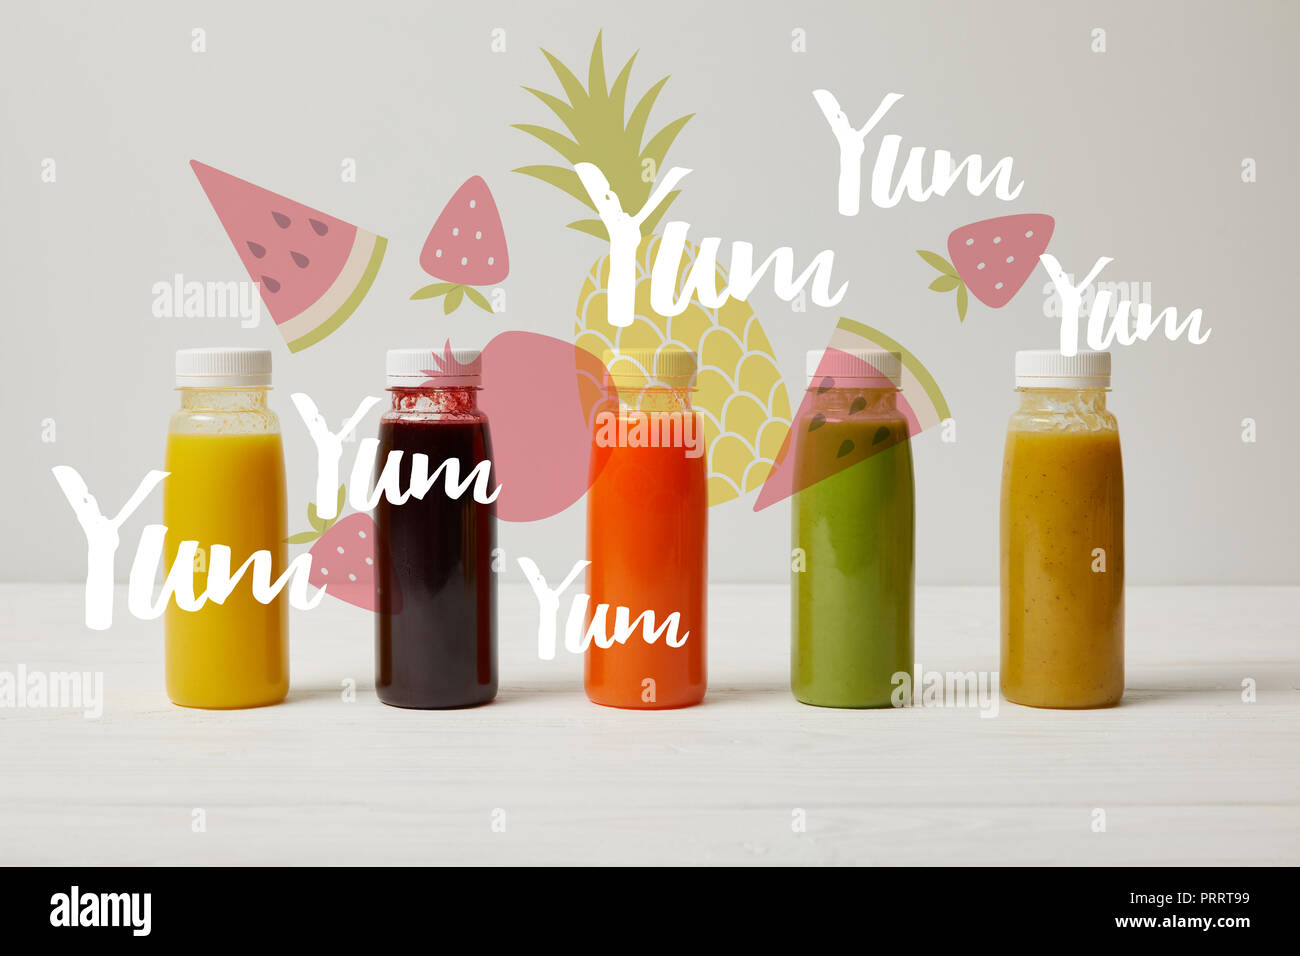 detox smoothies in bottles standing in row, refresh concept, yum yum yum inscription Stock Photo